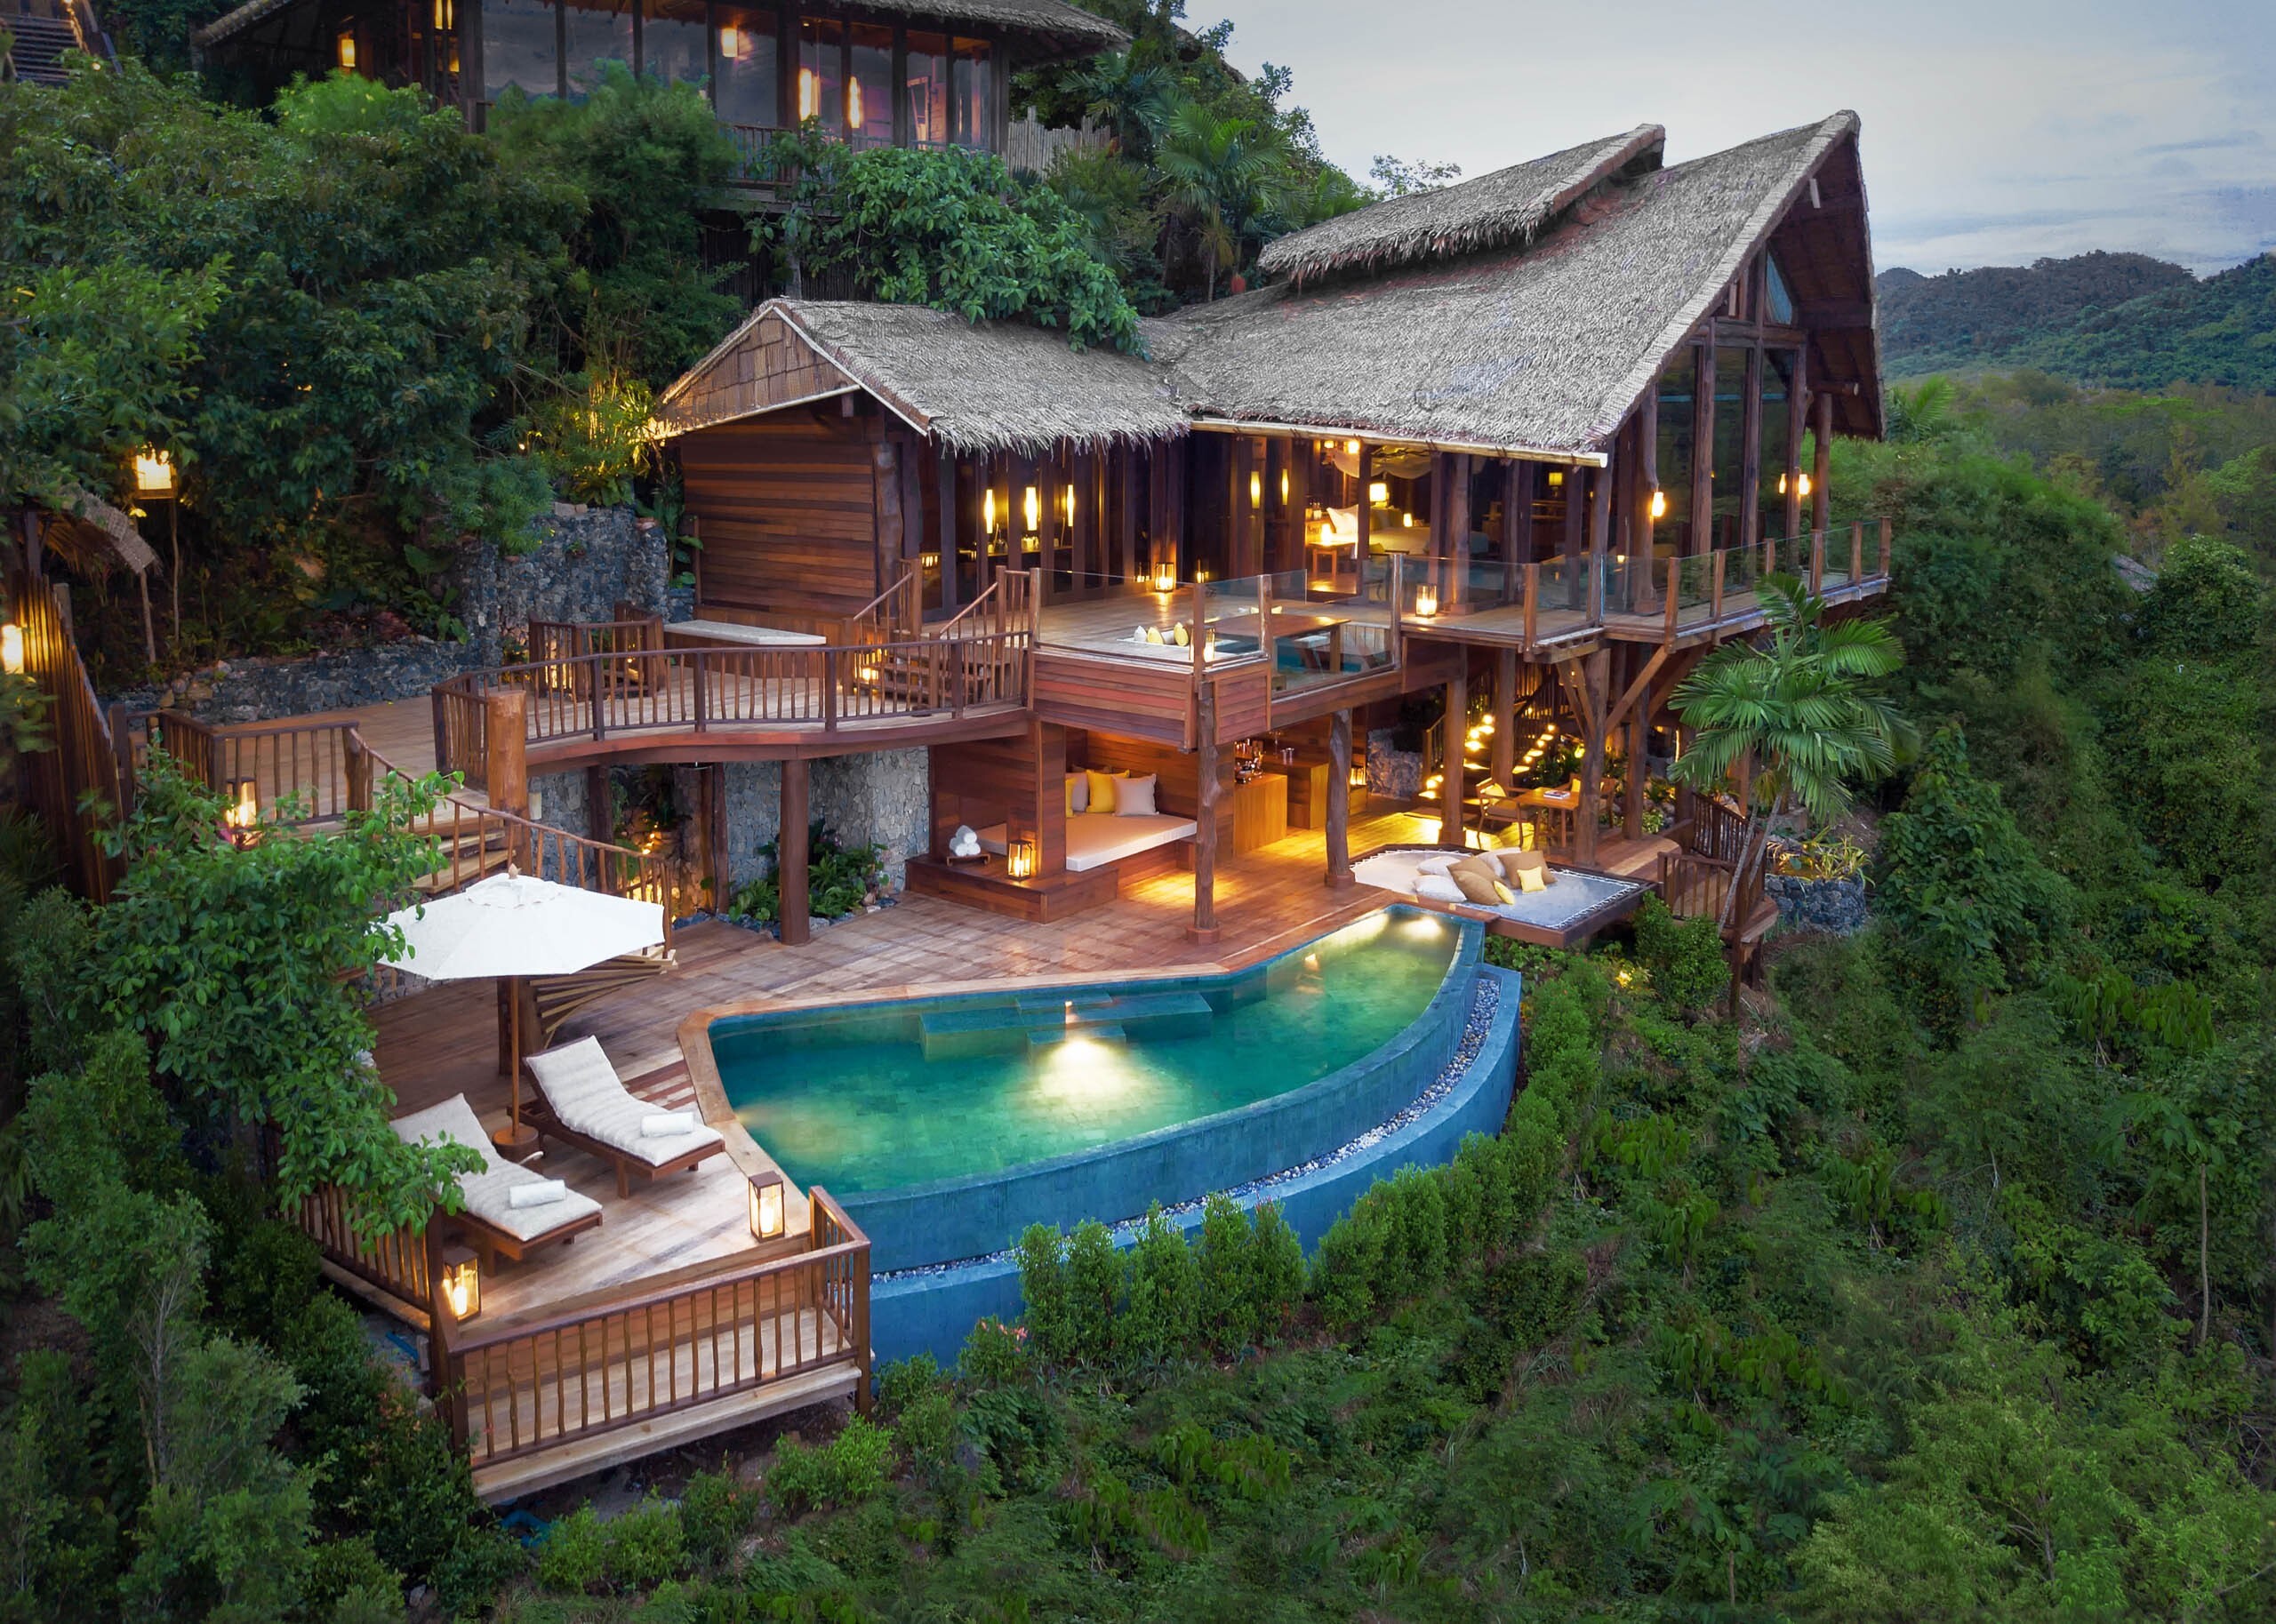 Six Senses Yao Noi features some of the best views of Phang Nga Bay in Thailand. Photo: handout